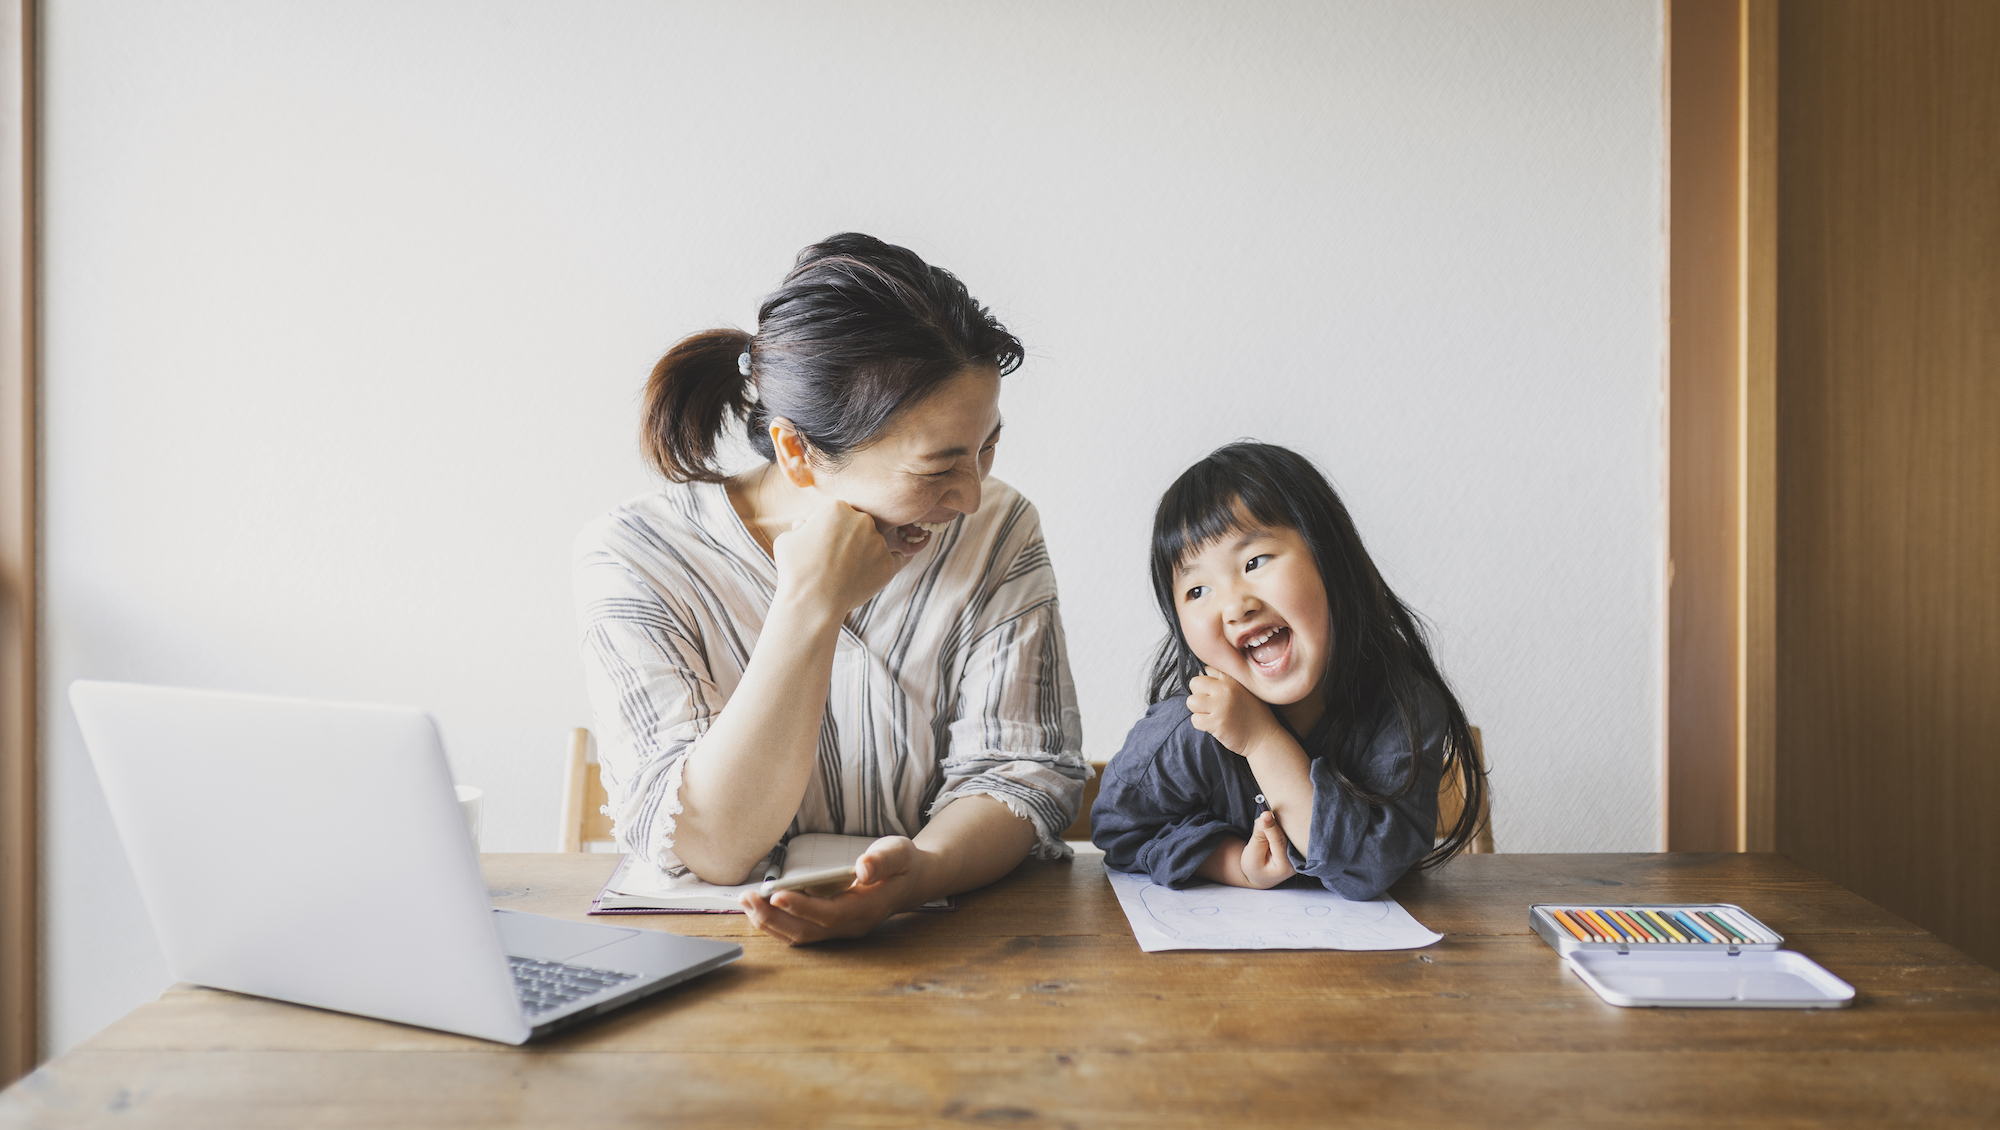 AAPI mom on laptop and daughter coloring are laughing together at the table